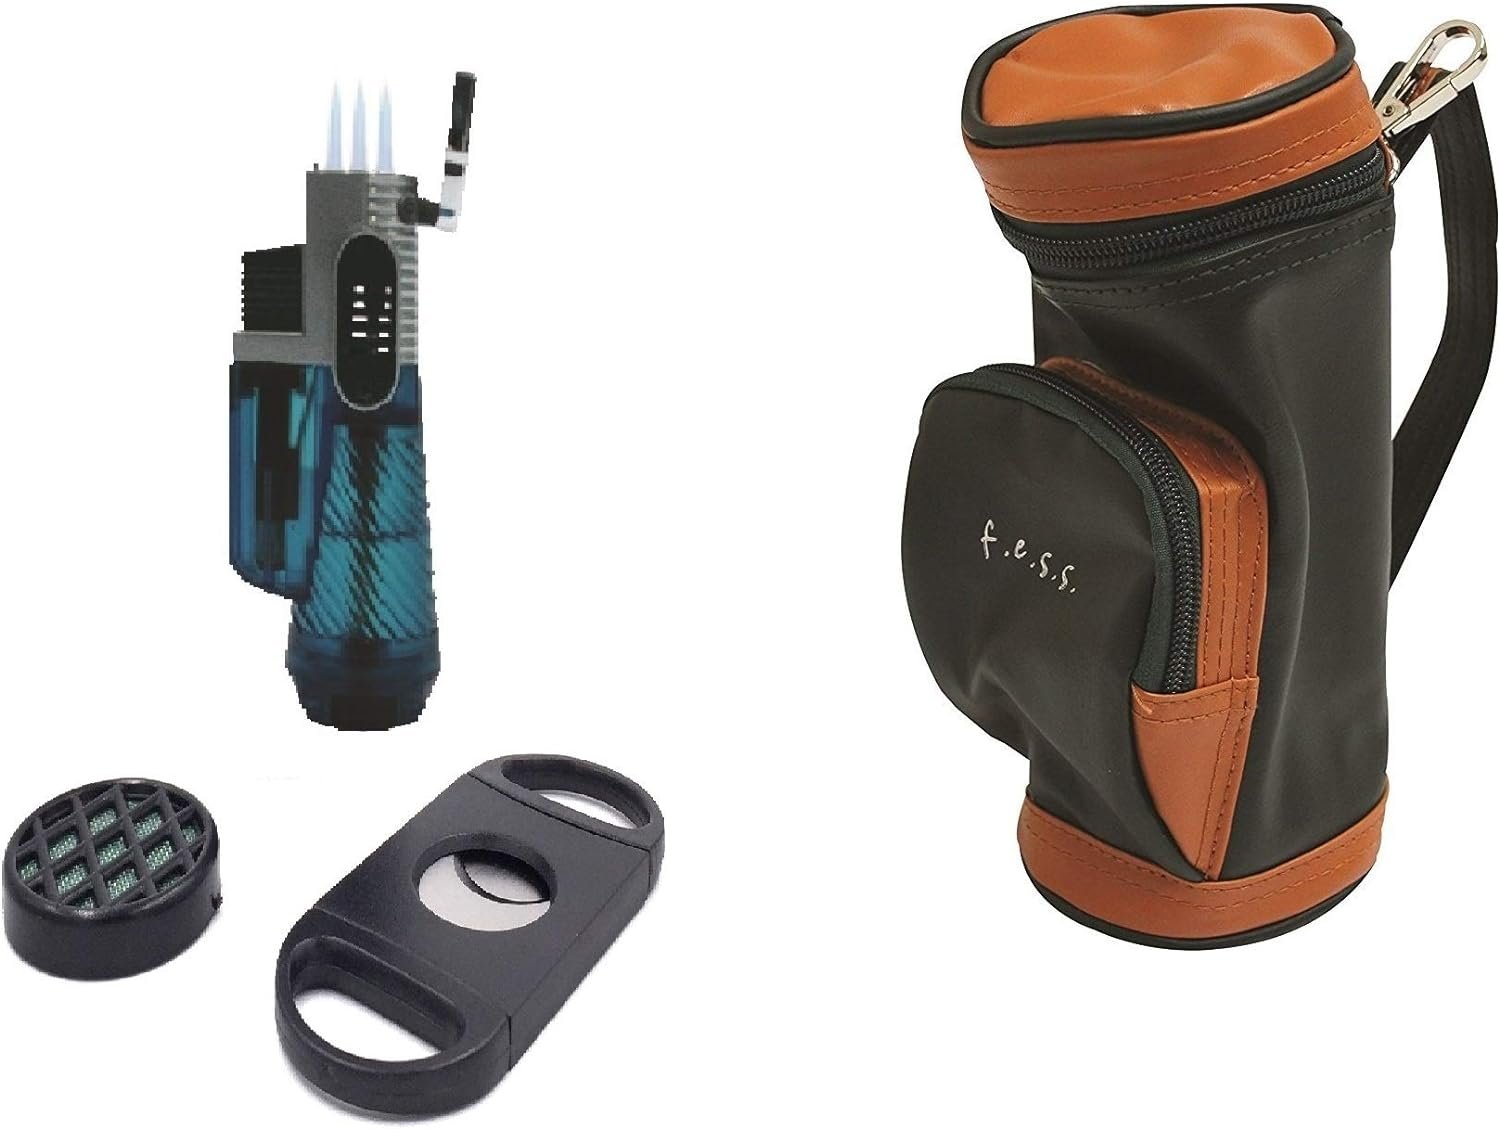 F.e.s.s. FESS Golf Gift Set Mini Golf Bag Humidor with Humidifier and Cutter